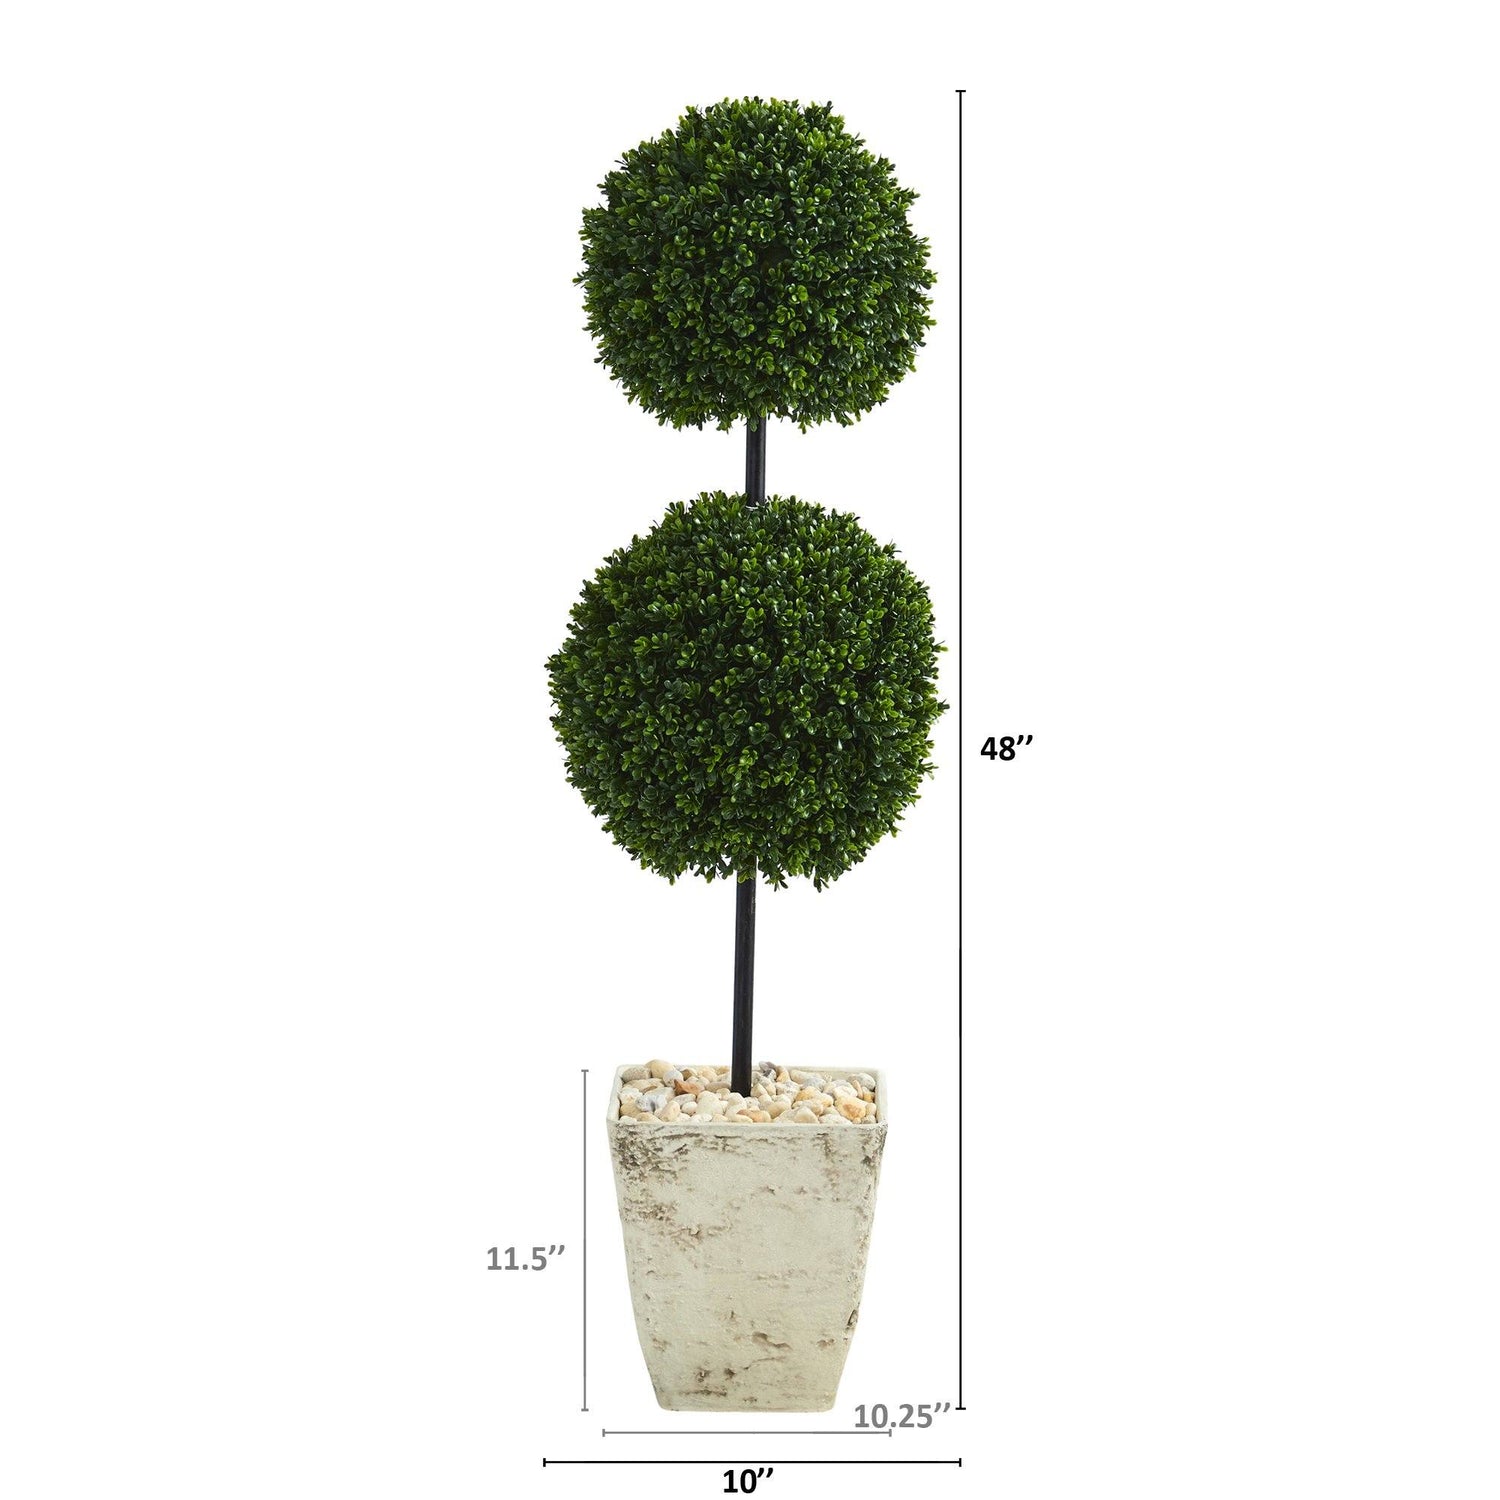 4’ Boxwood Double Ball Artificial Topiary Tree in Country White Planter (Indoor/Outdoor)